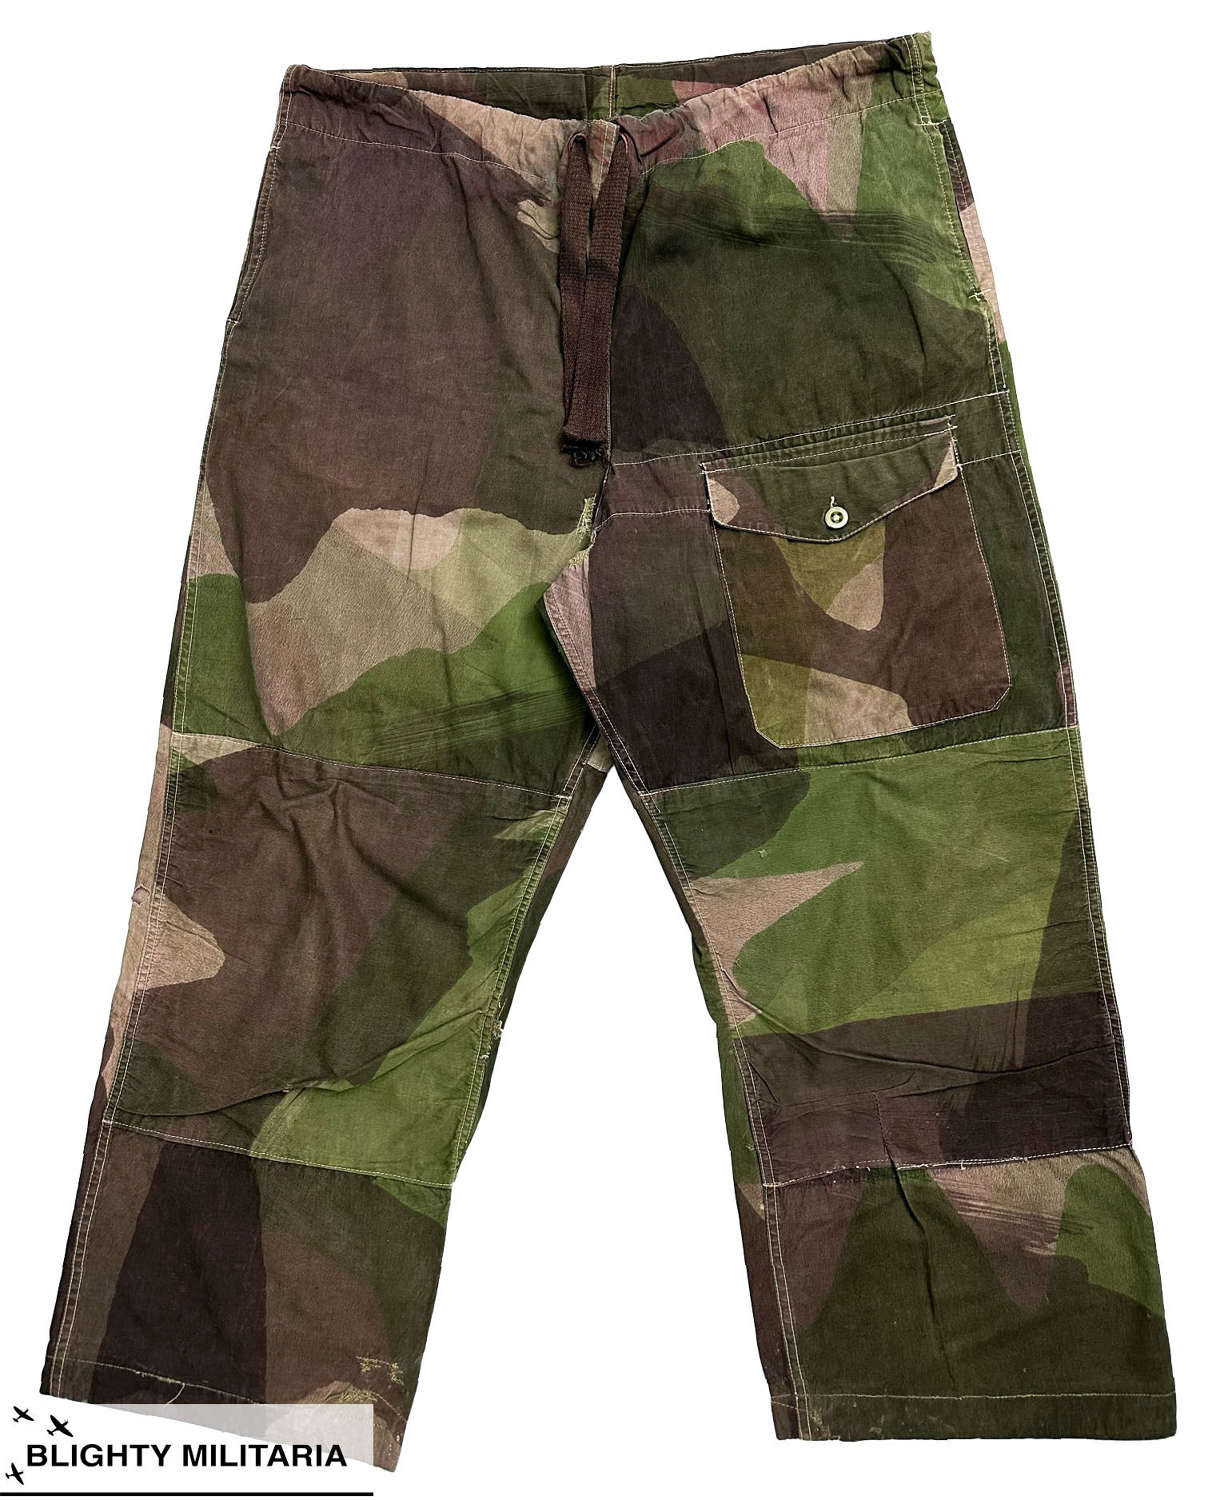 Rare Original WW2 British Army Windproof Camouflage Trousers - Size 4